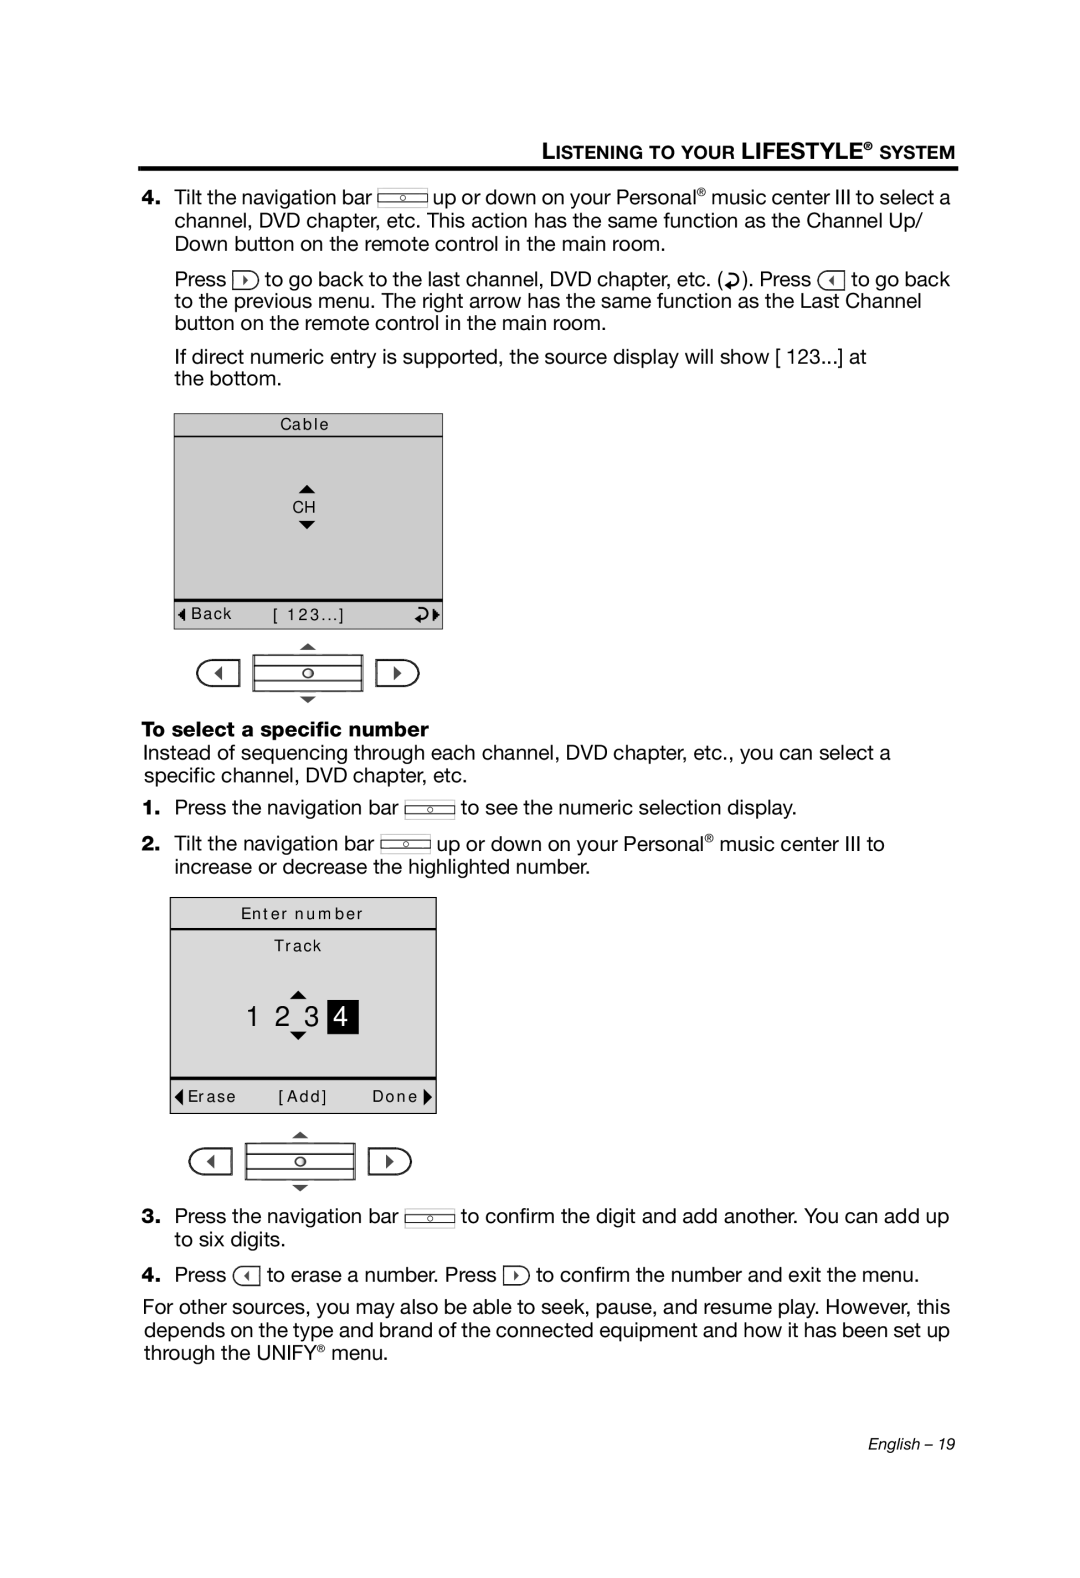 Bose Personal Music Center III, PMCIII manual 1 2 3, To select a specific number 